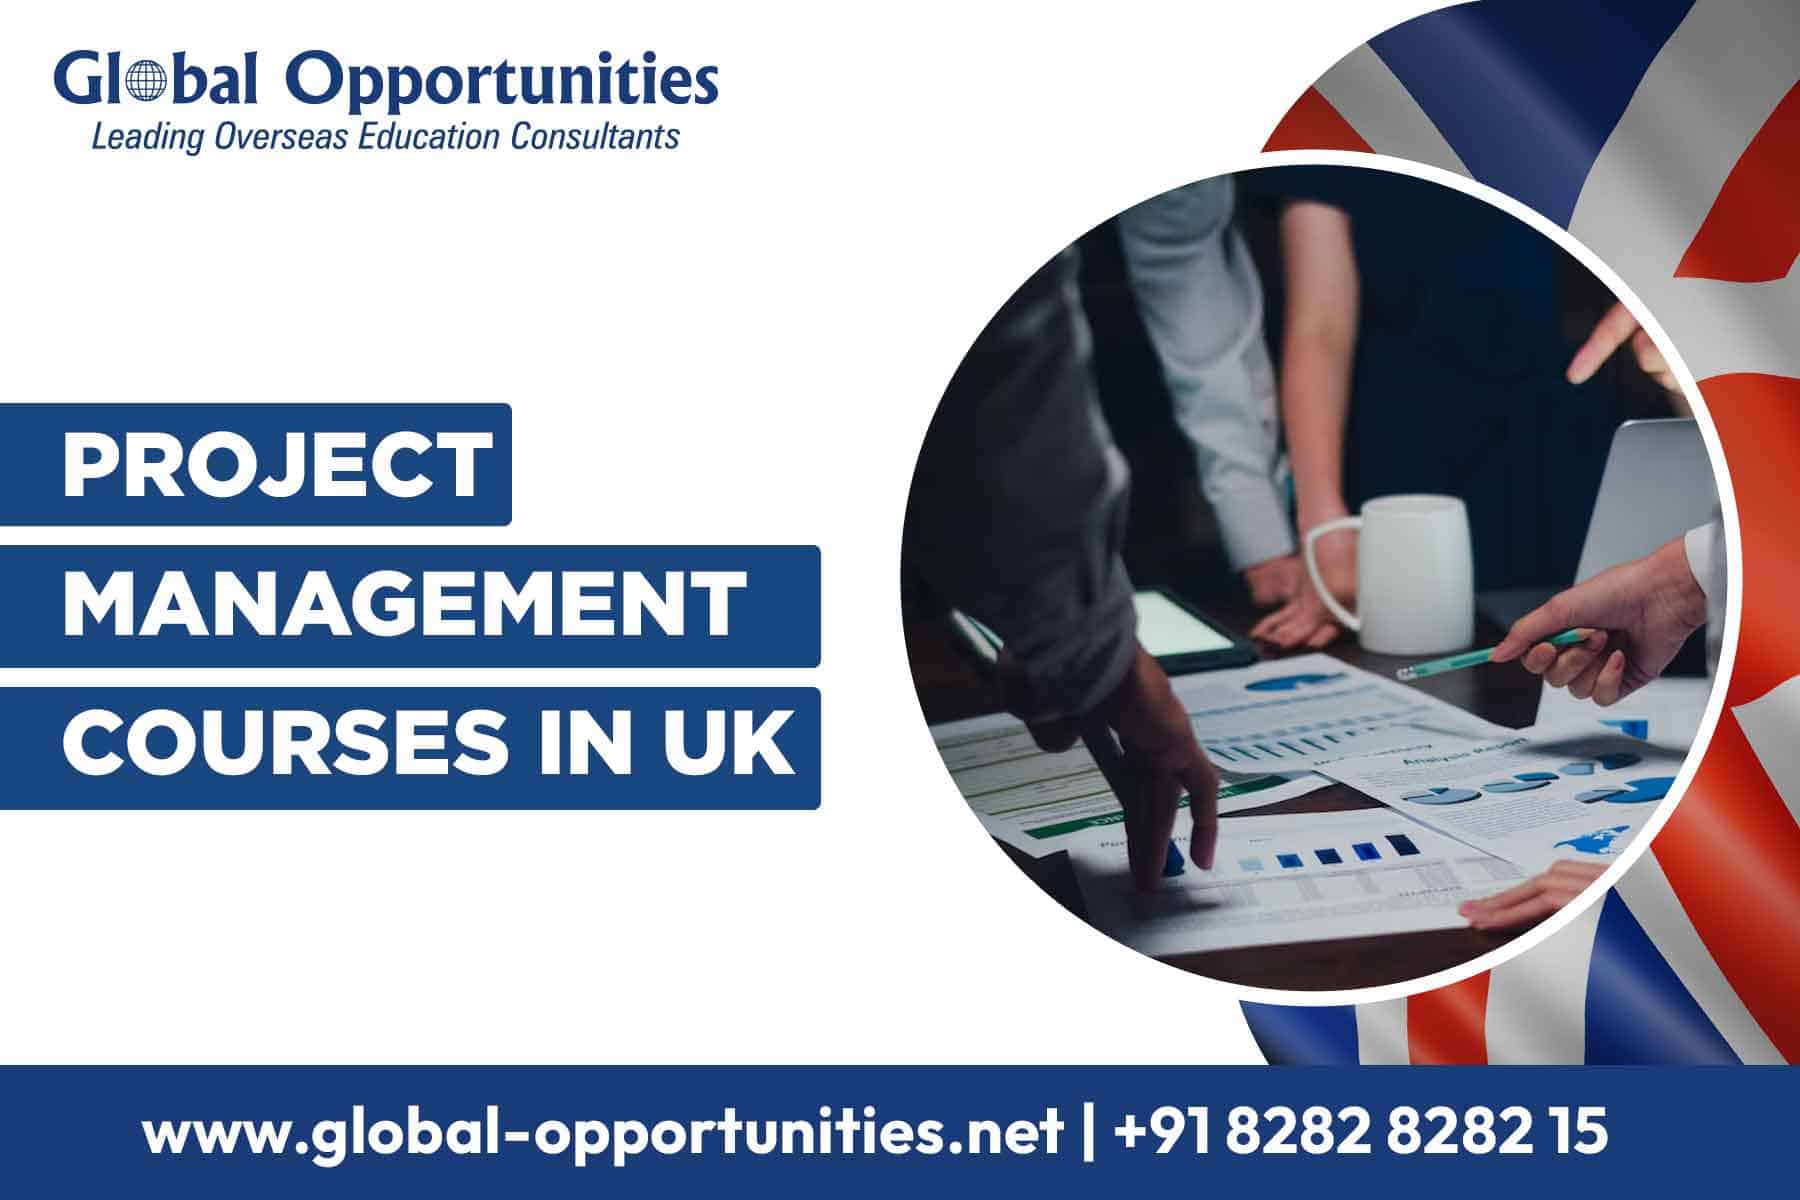 Project Management Courses in UK